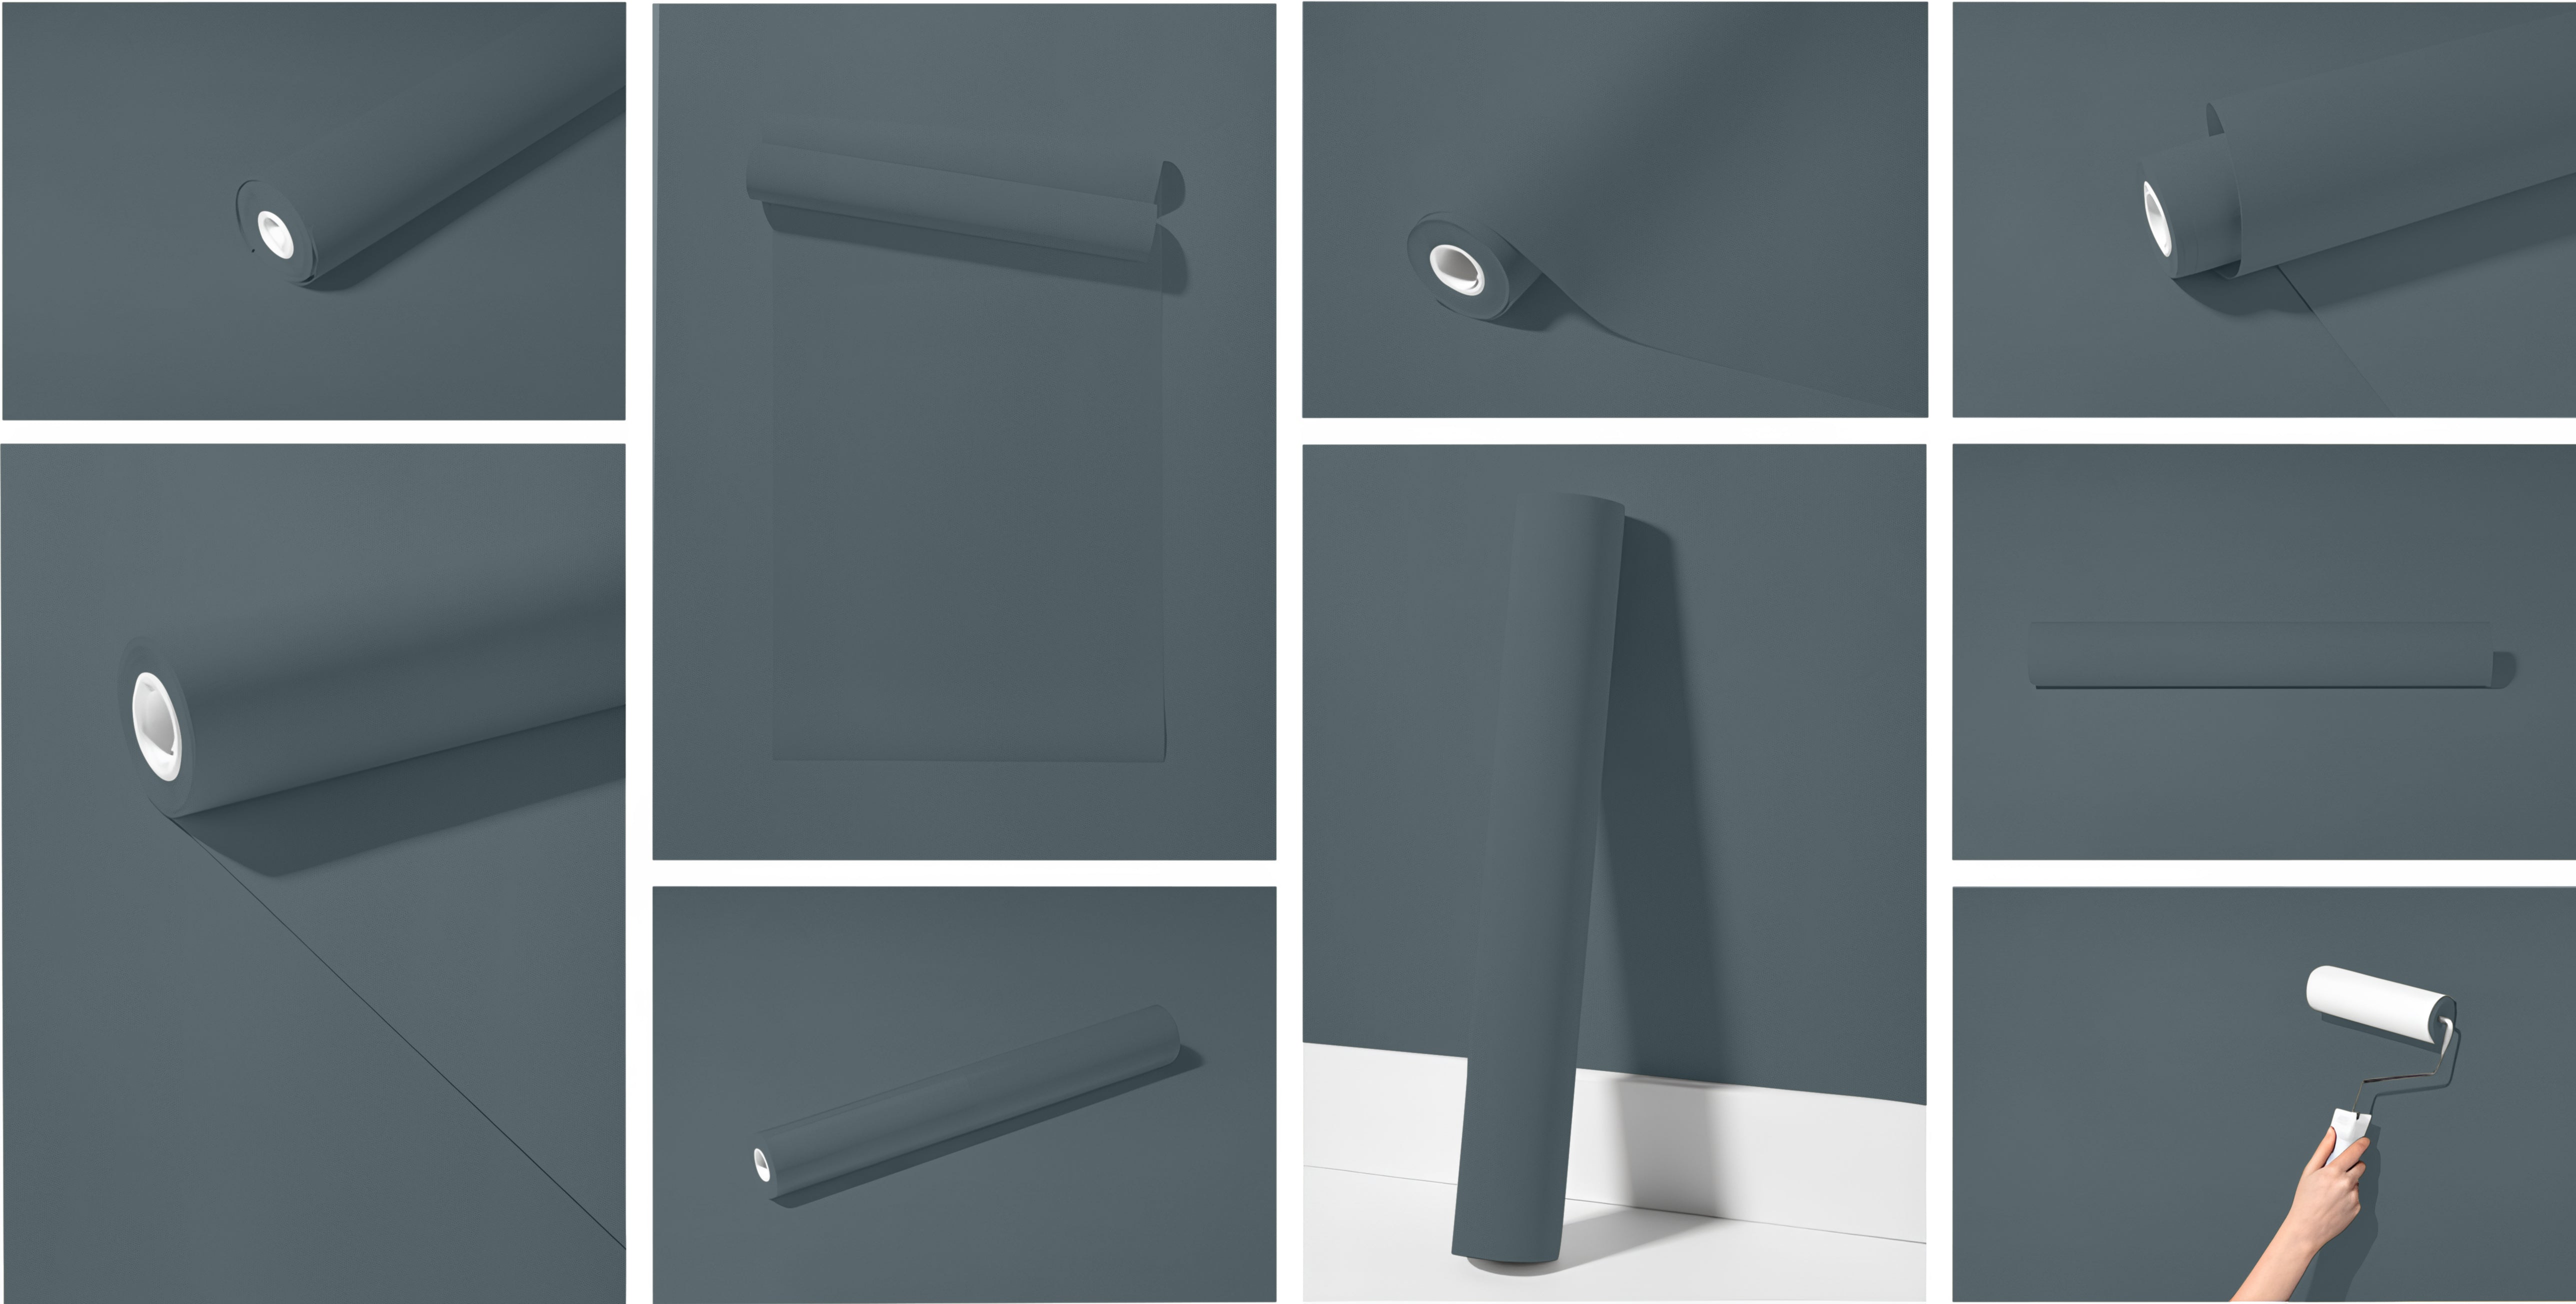 Peel & Stick Removable Re-usable Paint - Color RAL 7031 Blue Grey - offRAL™ - RALRAW LLC, USA